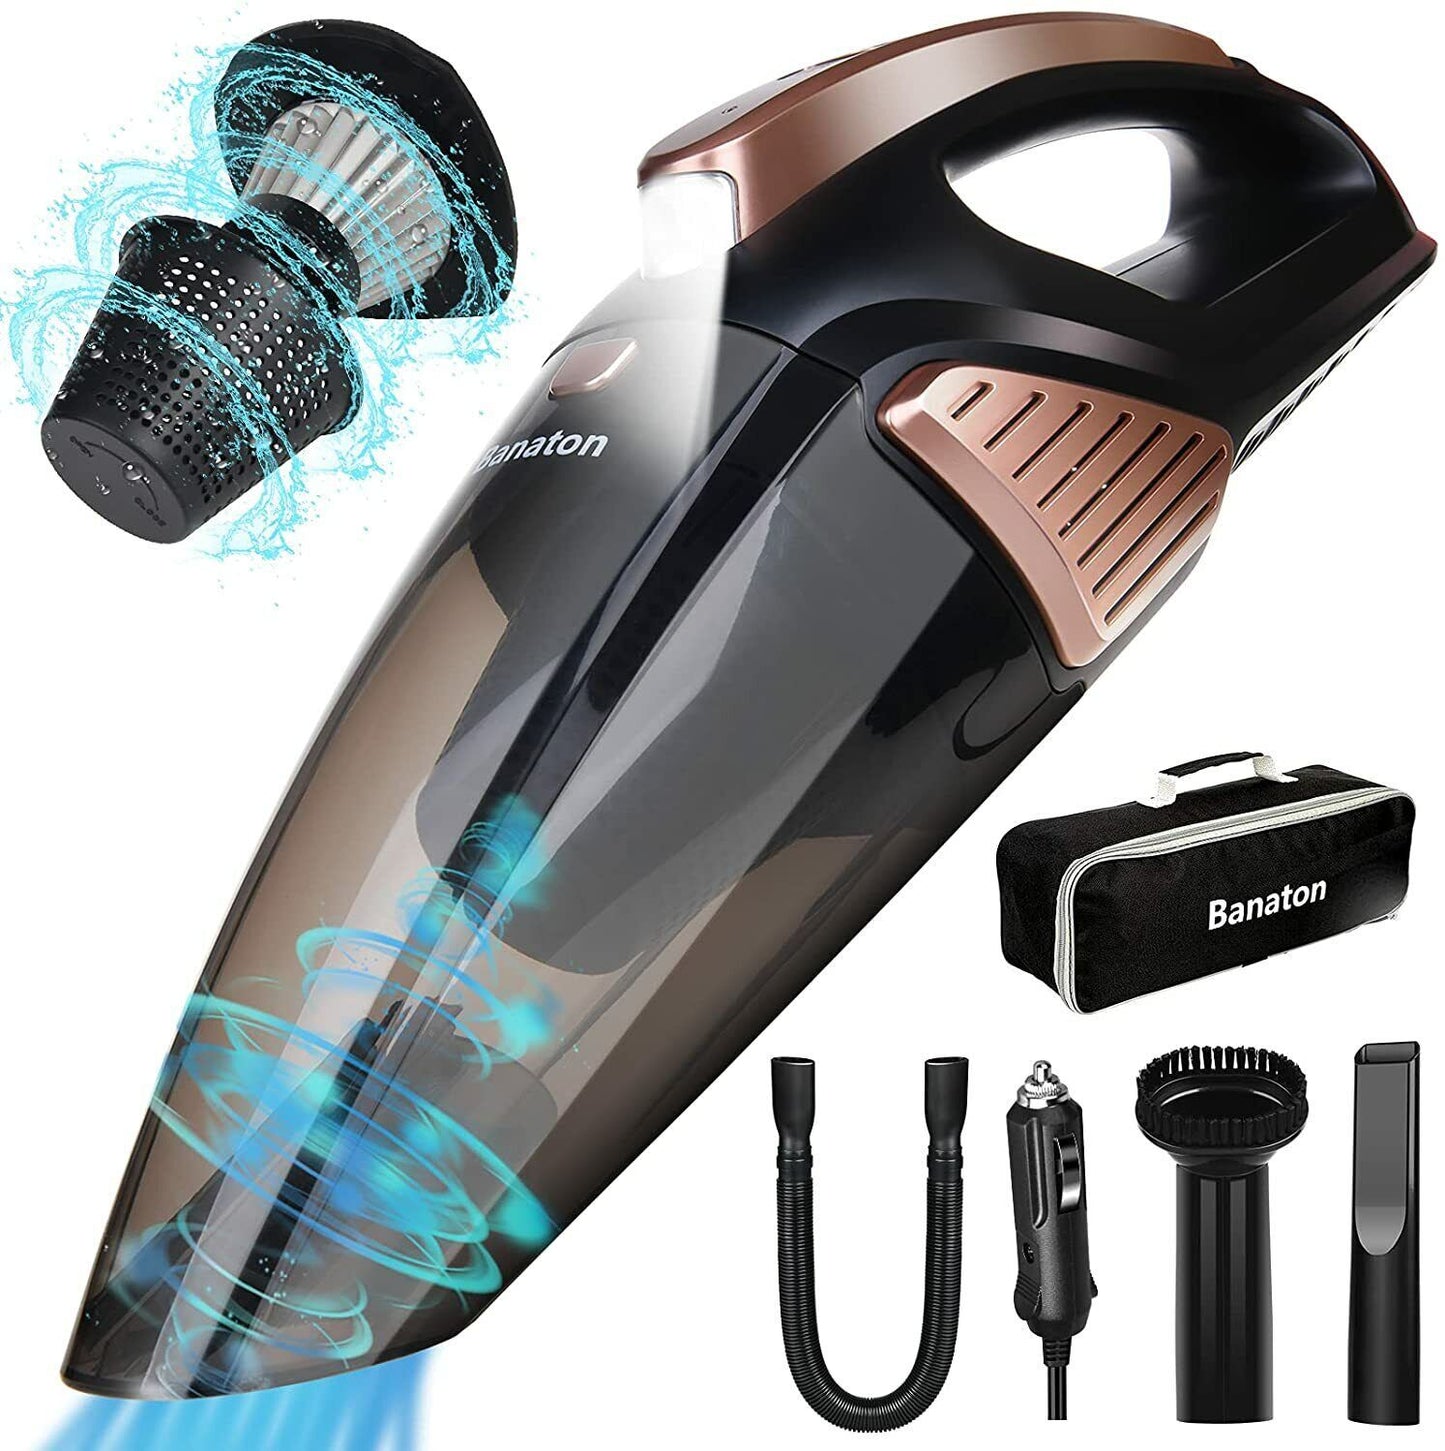 Banaton Car Vacuum Cleaner With Attachments And Carrying Case-Wet & Dry Use